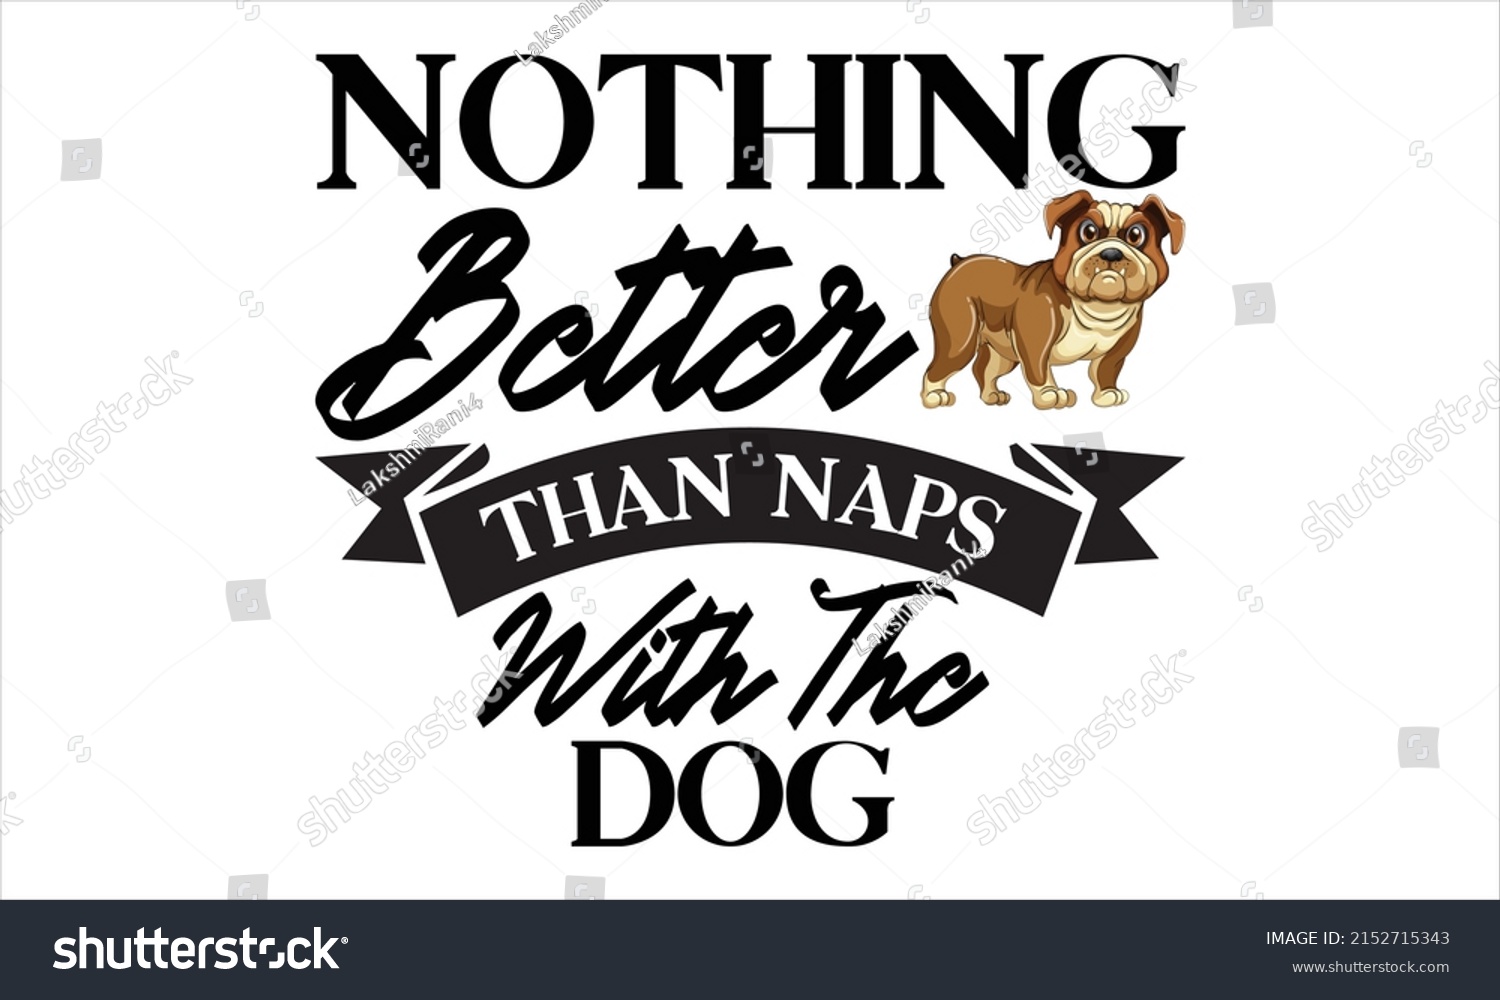 SVG of Nothing better than naps with the dog  -   Lettering design for greeting banners, Mouse Pads, Prints, Cards and Posters, Mugs, Notebooks, Floor Pillows and T-shirt prints design.
 svg